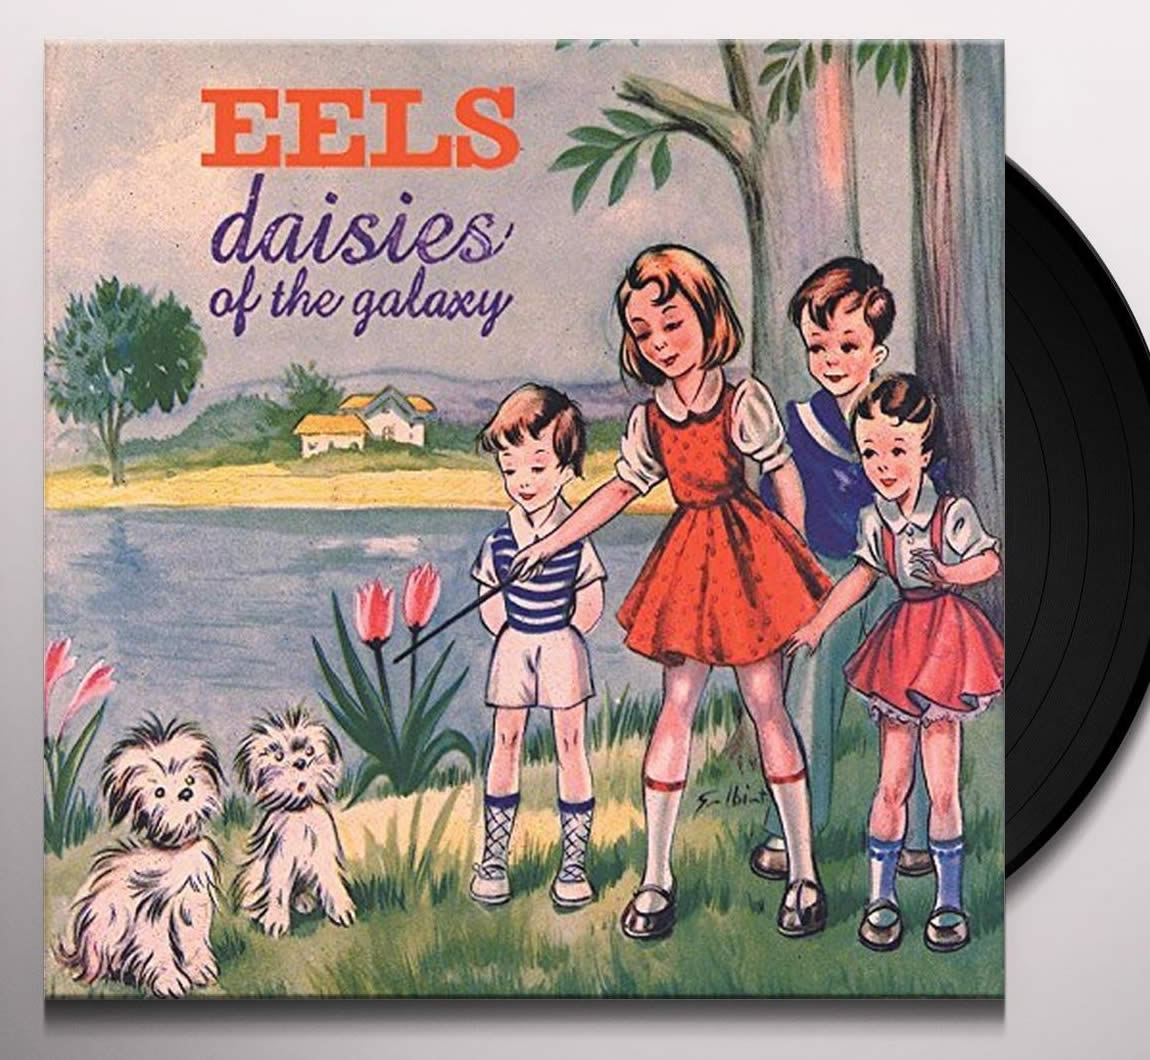 NEW (Euro) - Eels, Daisies of the Galaxy LP